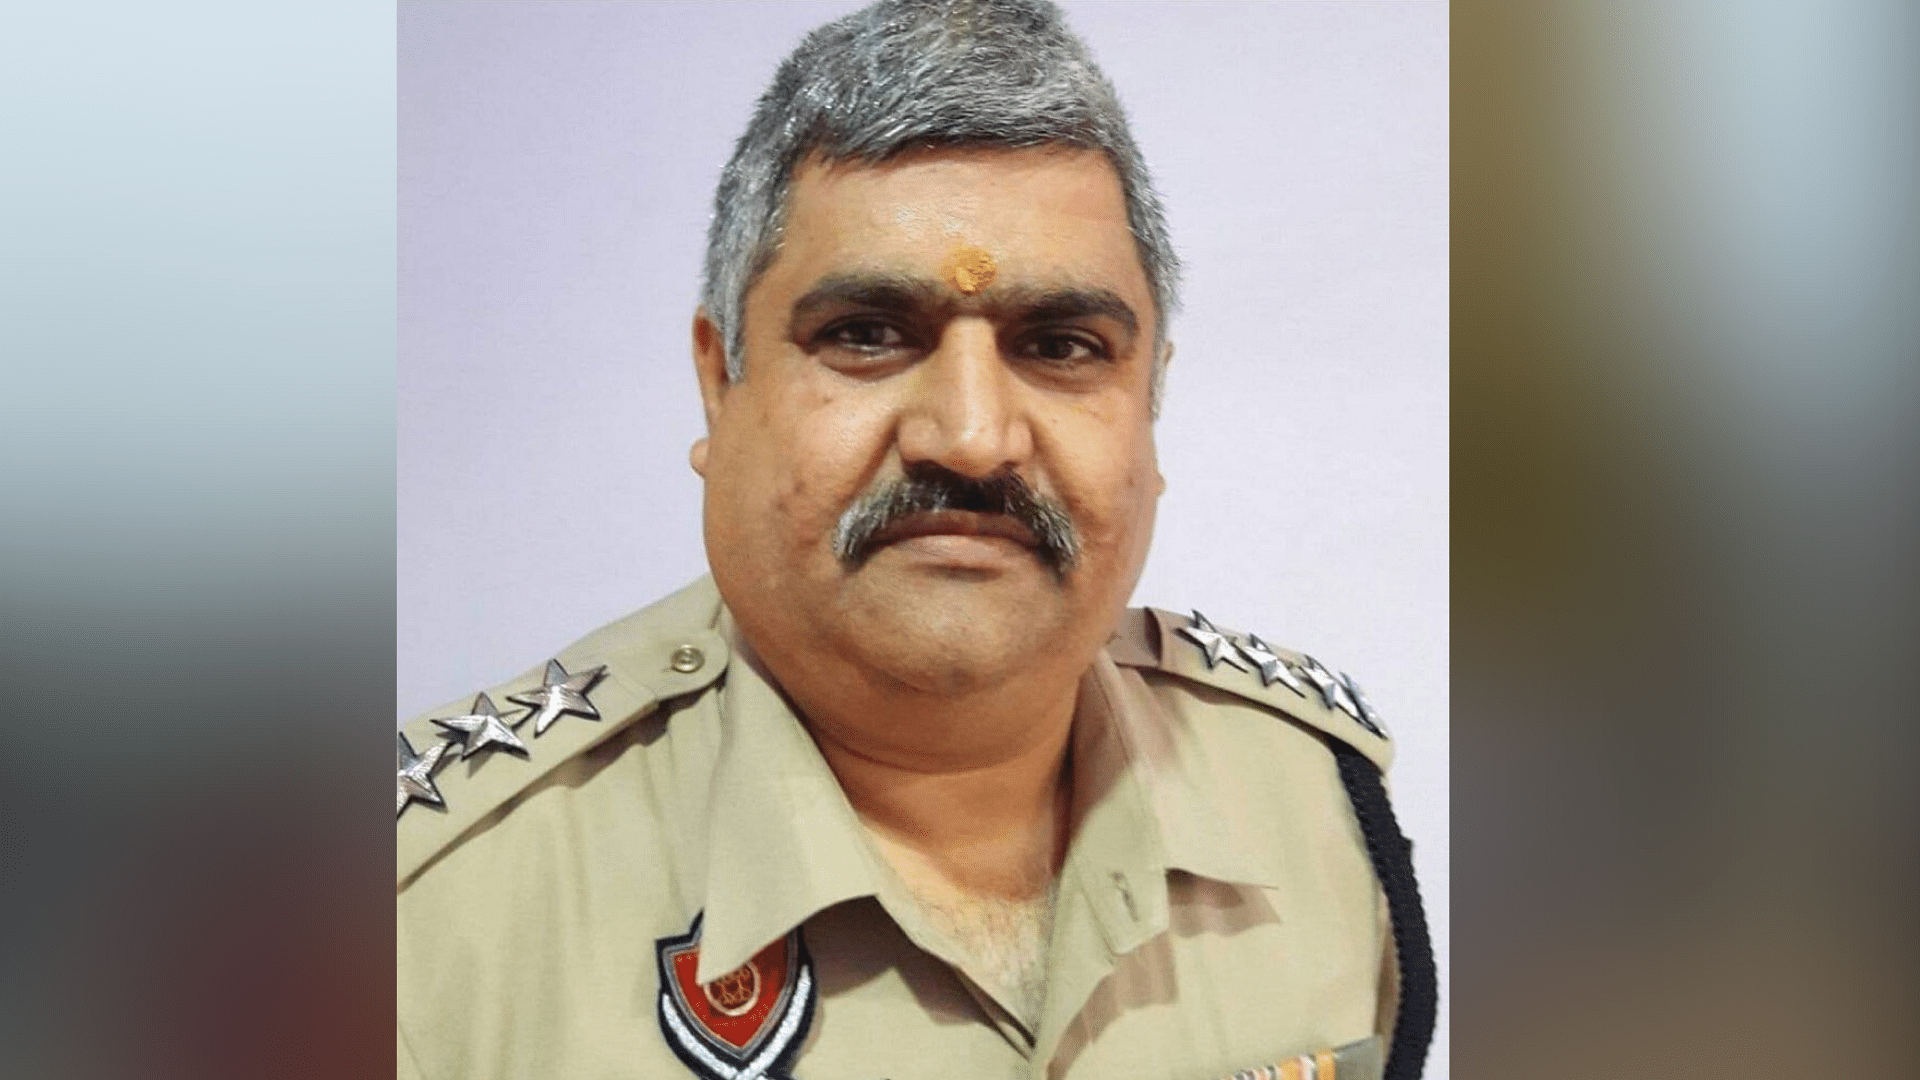 ACP Anil Kohli, who was undergoing treatment for COVID-19 at a hospital in Ludhiana, passed away on Saturday.